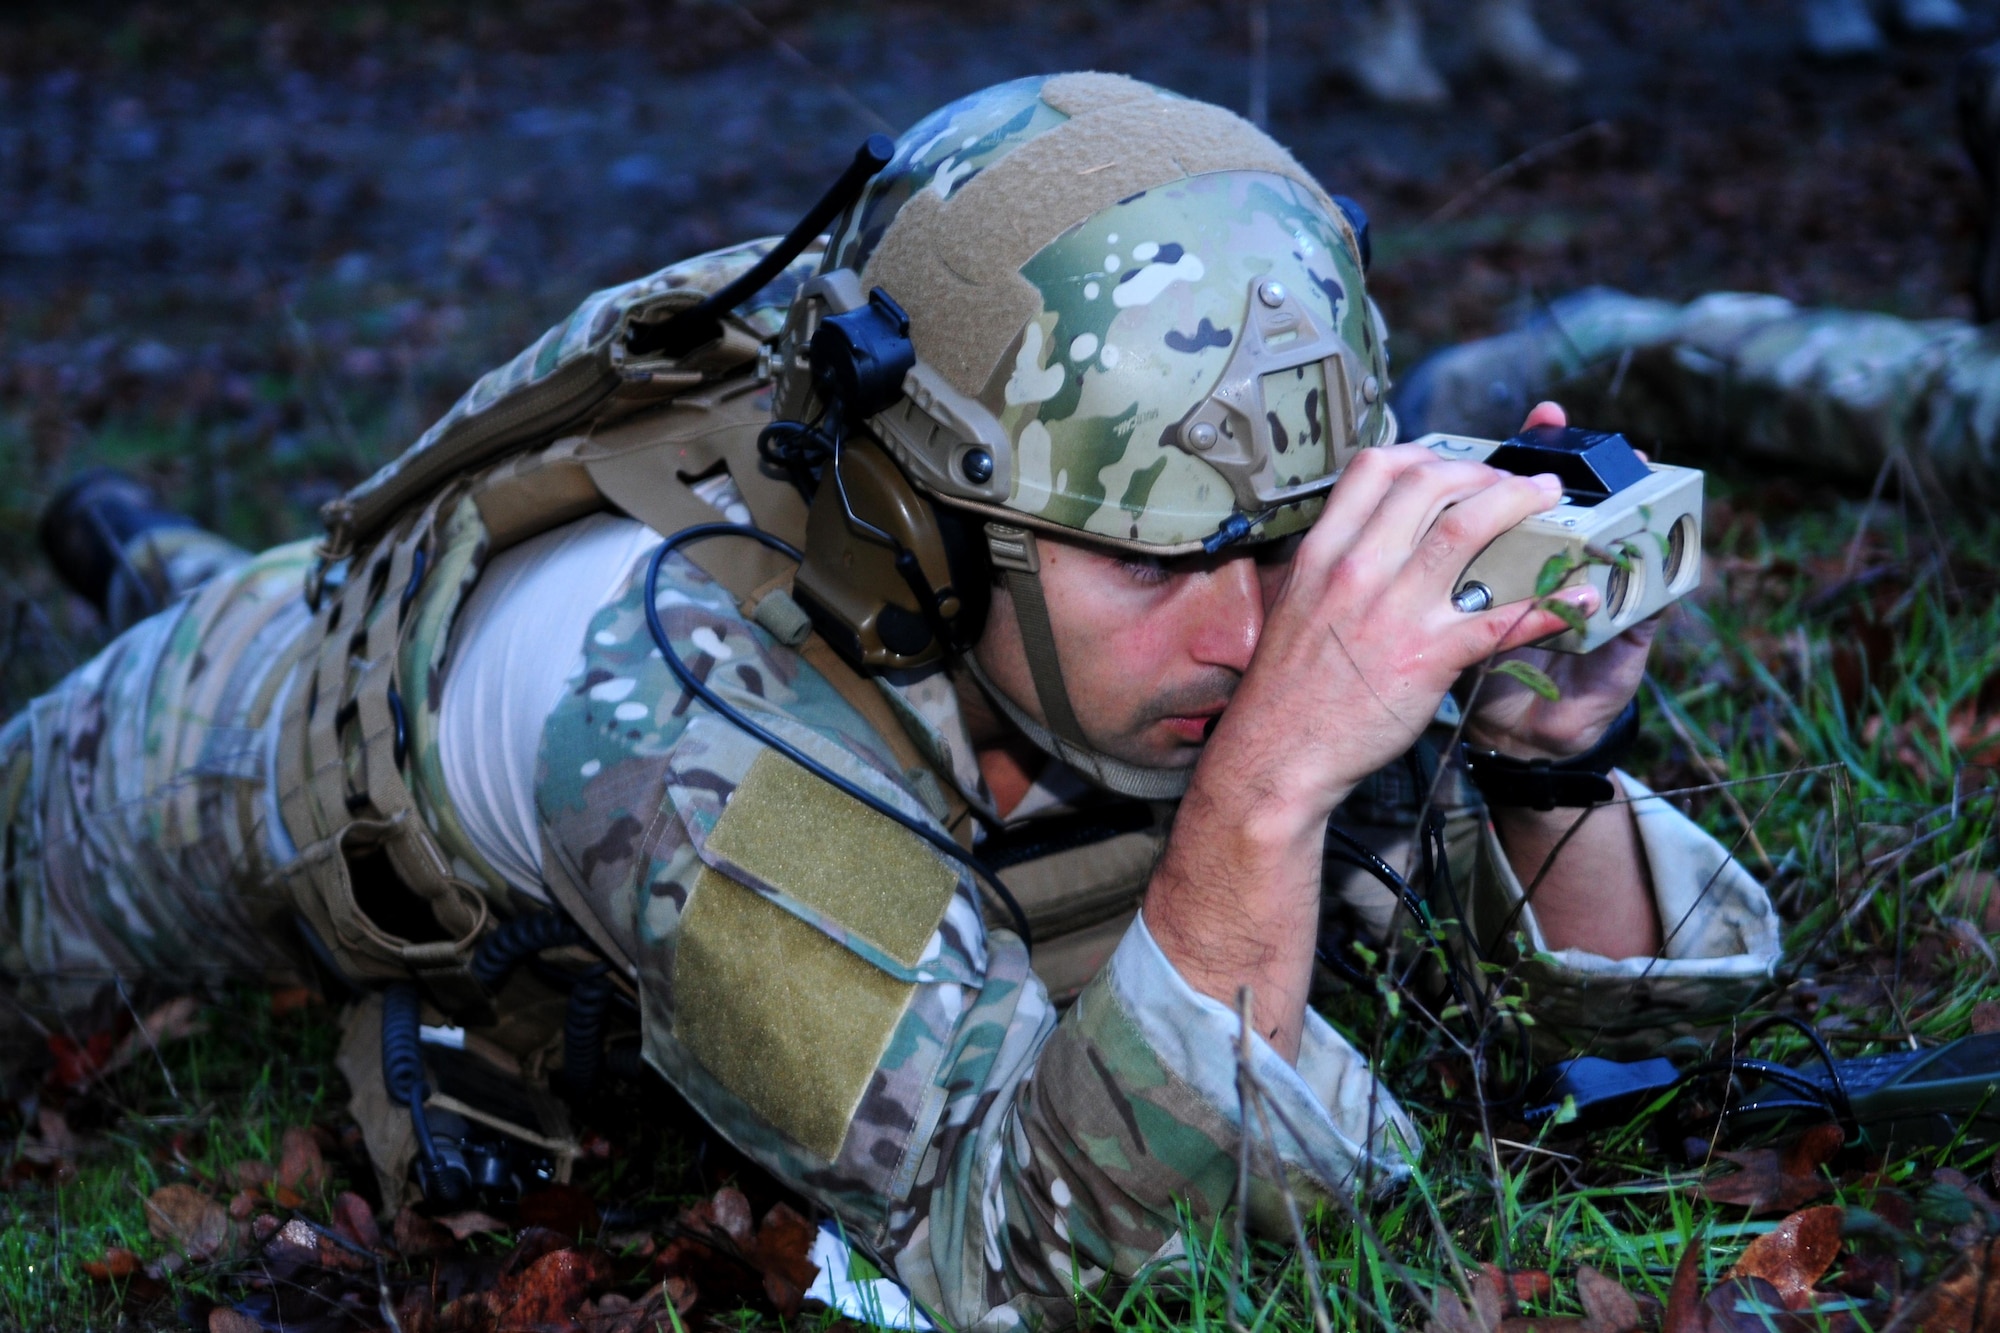 A tactical air control party specialist from the 116th Air Support Operations Squadron assesses the exercise battlefield during Exercise Cascade Warrior on Nov. 8 at Joint Base Lewis-McChord.